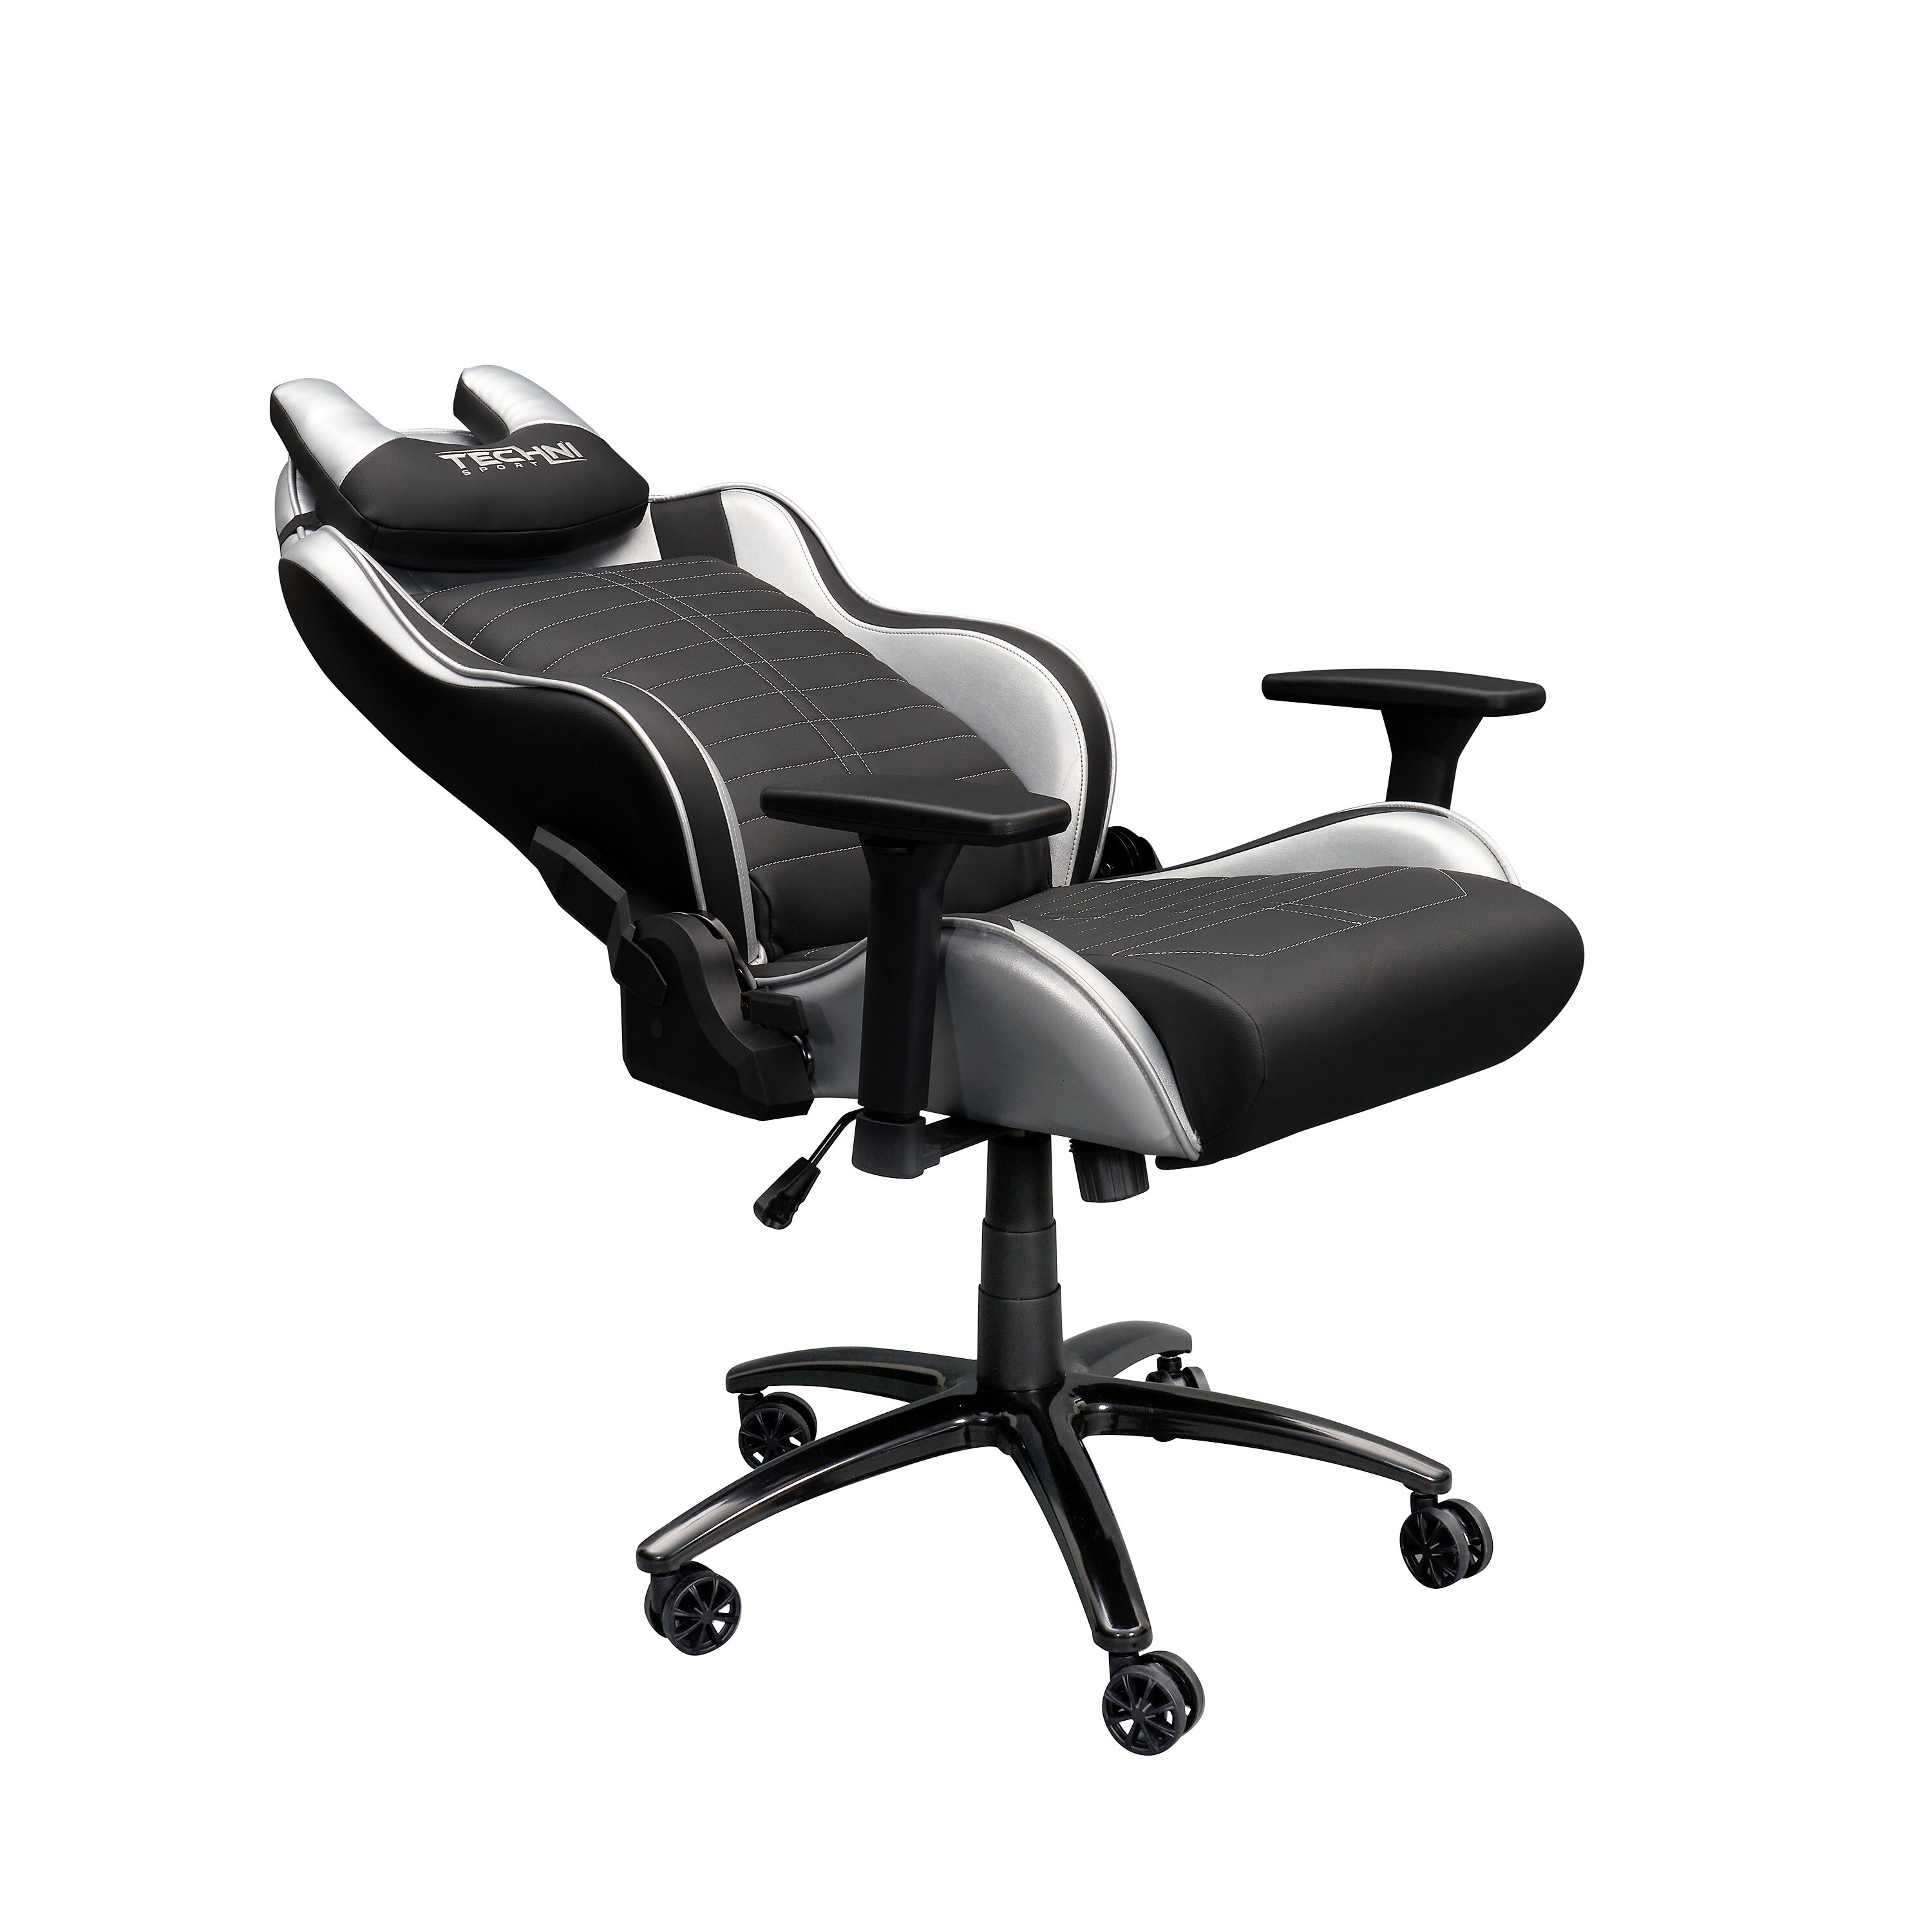 https://ak1.ostkcdn.com/images/products/is/images/direct/846a67fd09db87e638b8c67255654164e266cbe2/Sport-Ergonomic-Racing-Style-Gaming-Chair%2C-Silver.jpg